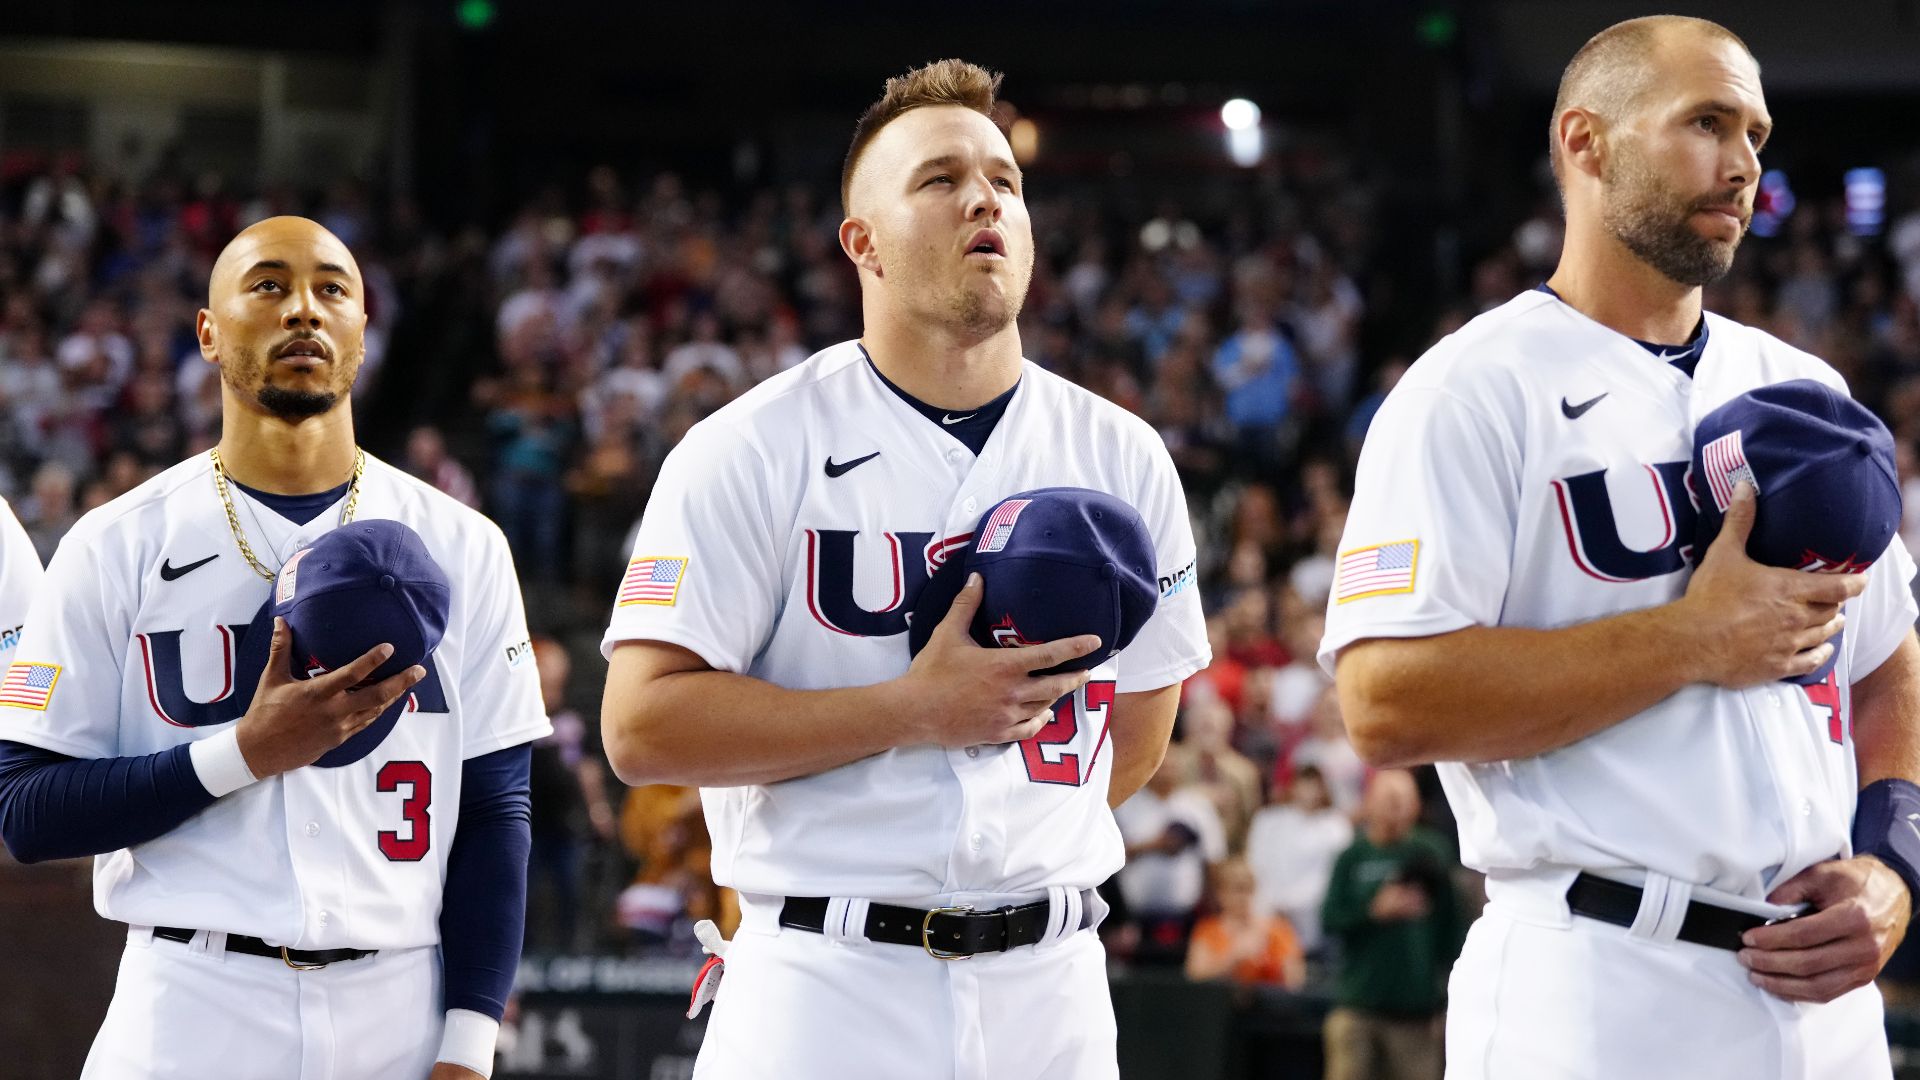 World Baseball Classic - The teams are set. Who are you most